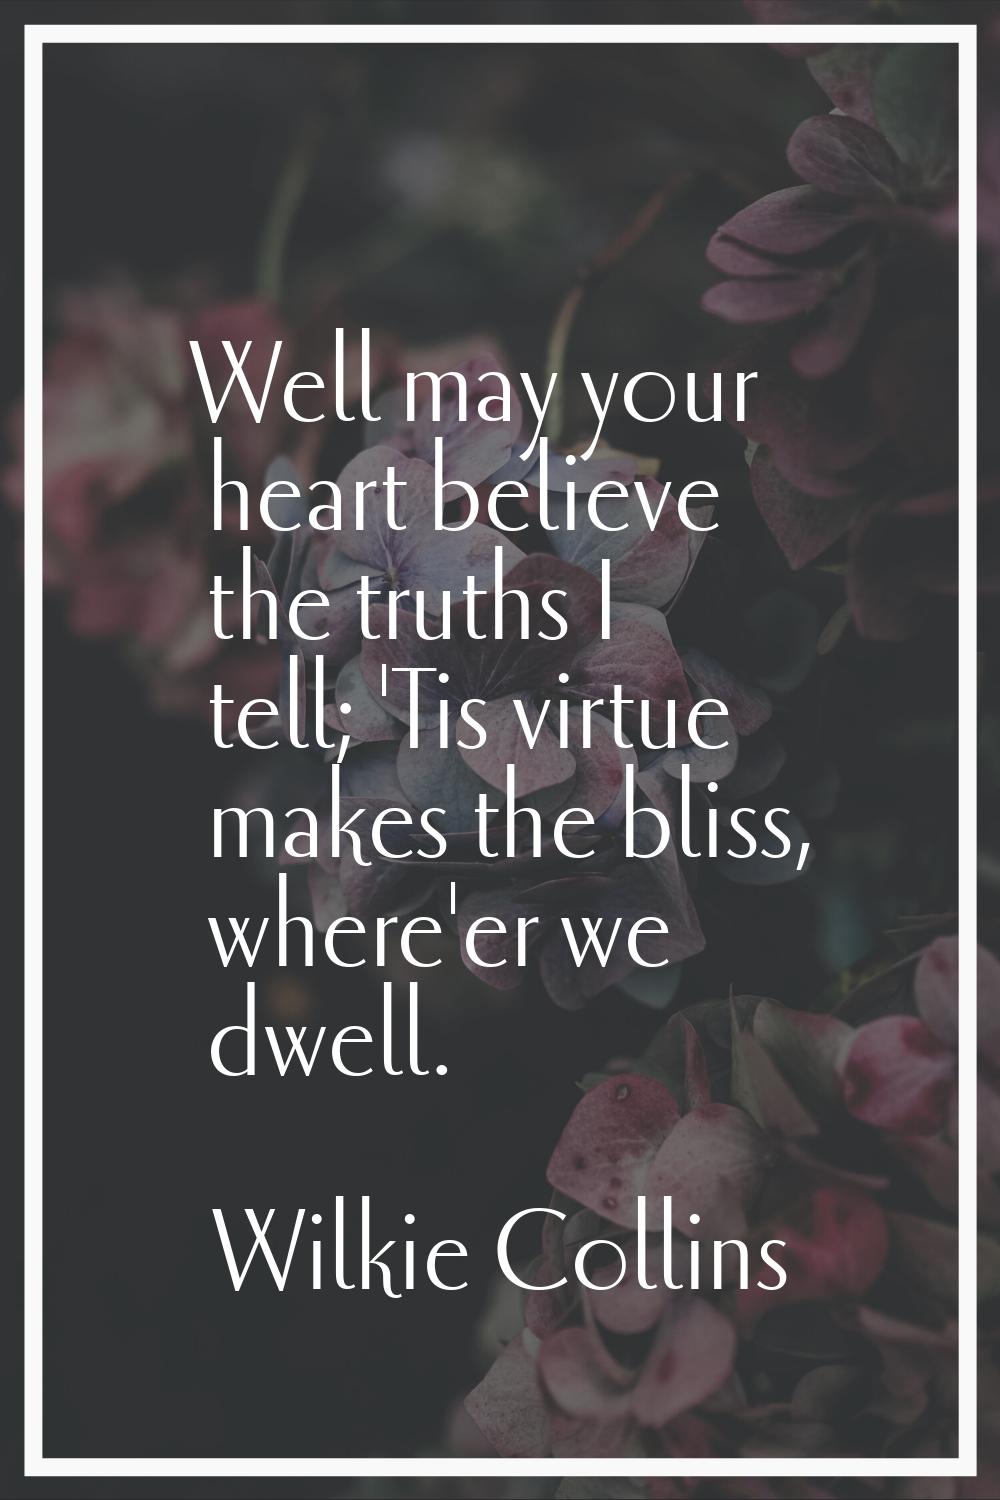 Well may your heart believe the truths I tell; 'Tis virtue makes the bliss, where'er we dwell.